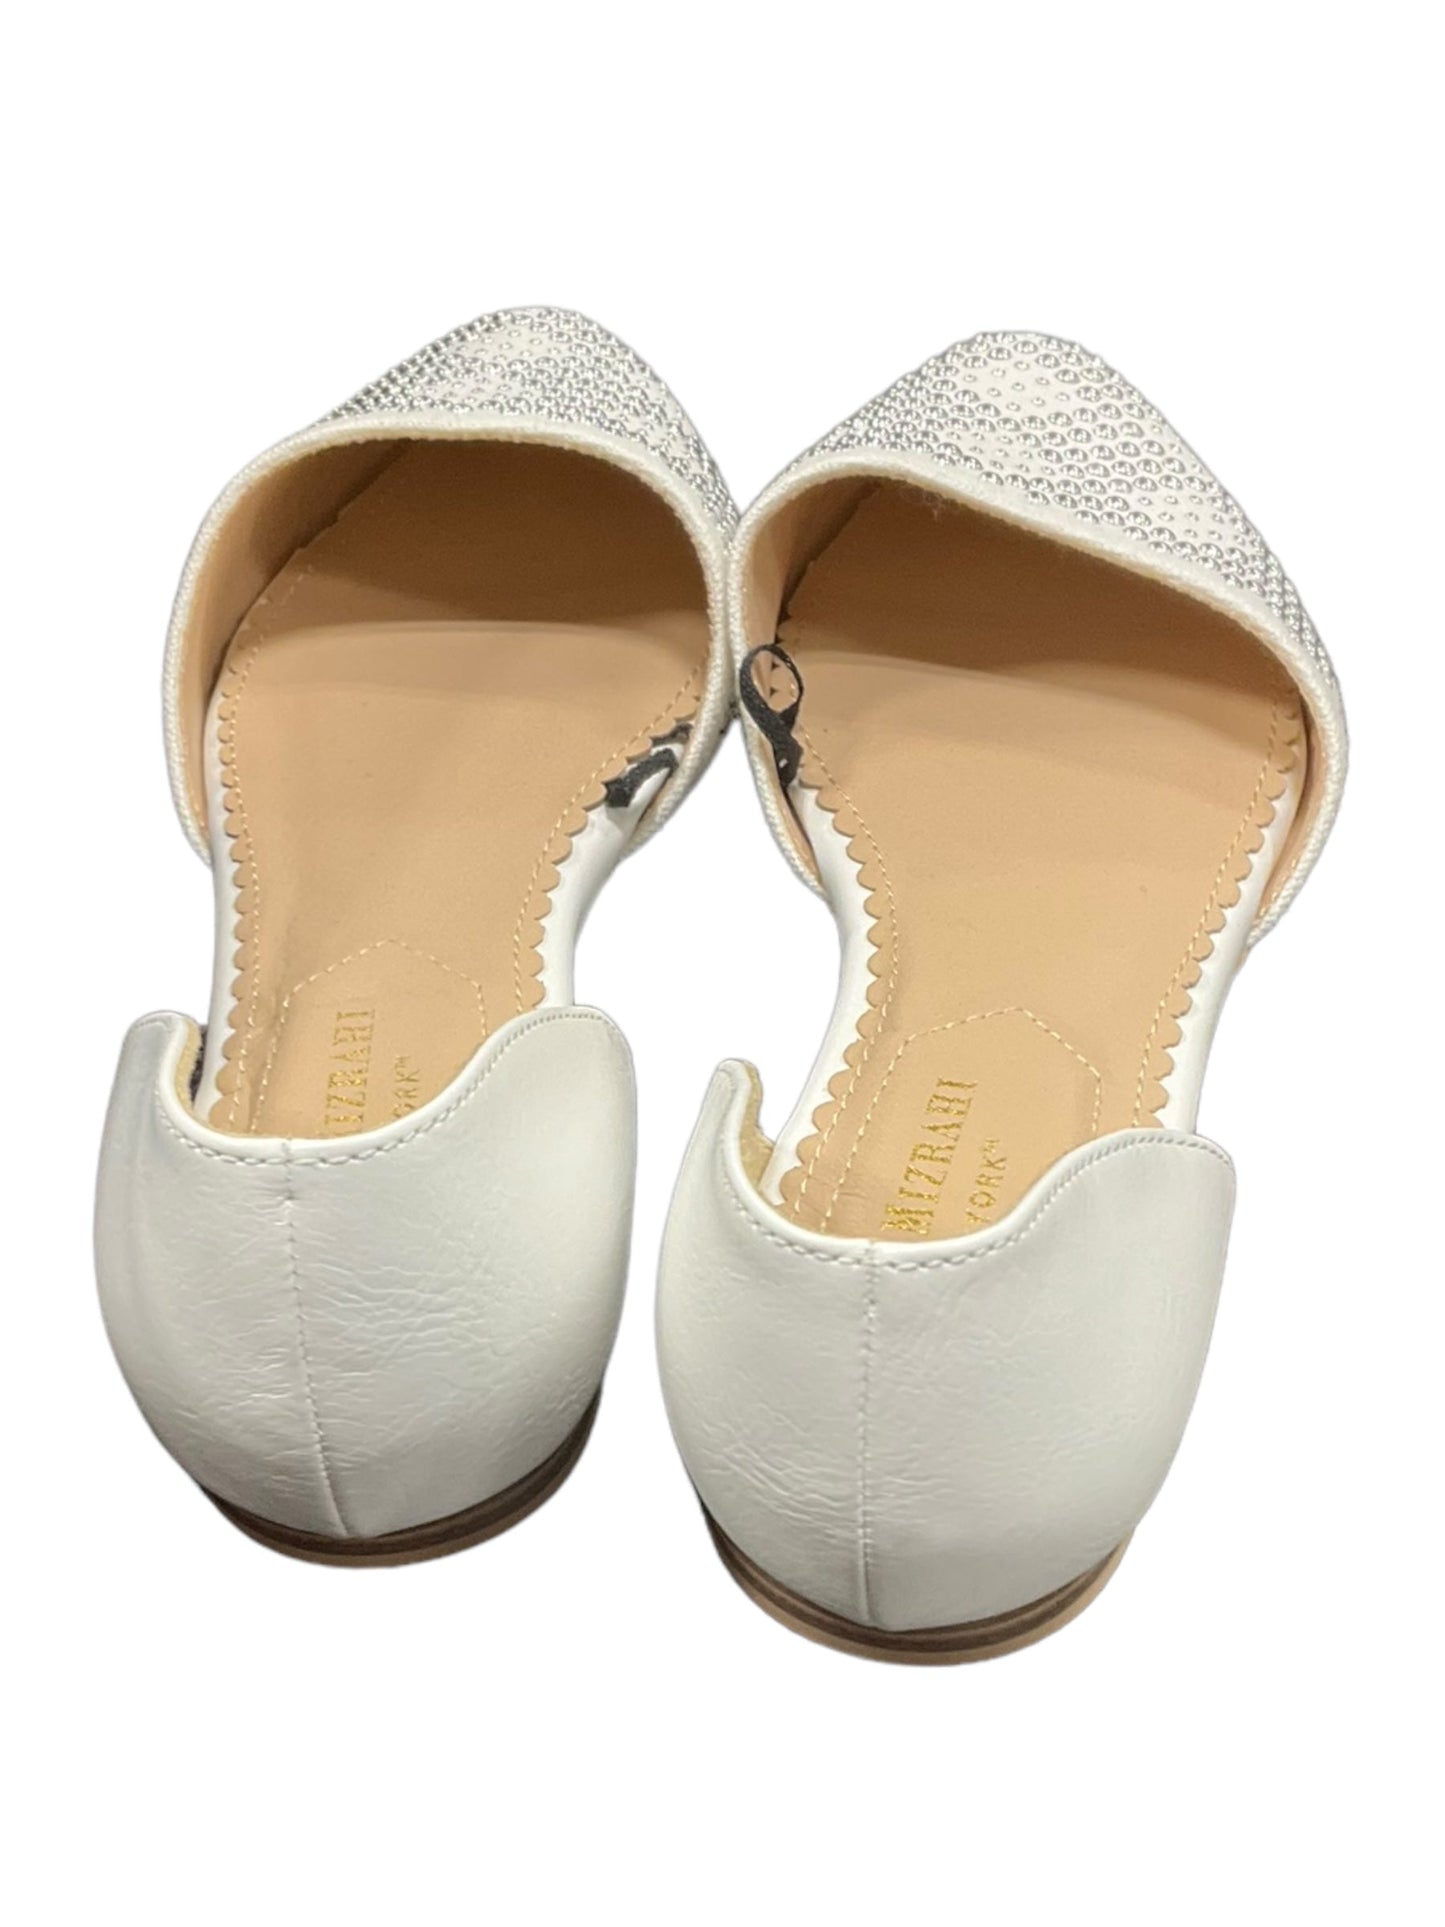 Shoes Flats By Isaac Mizrahi  Size: 6